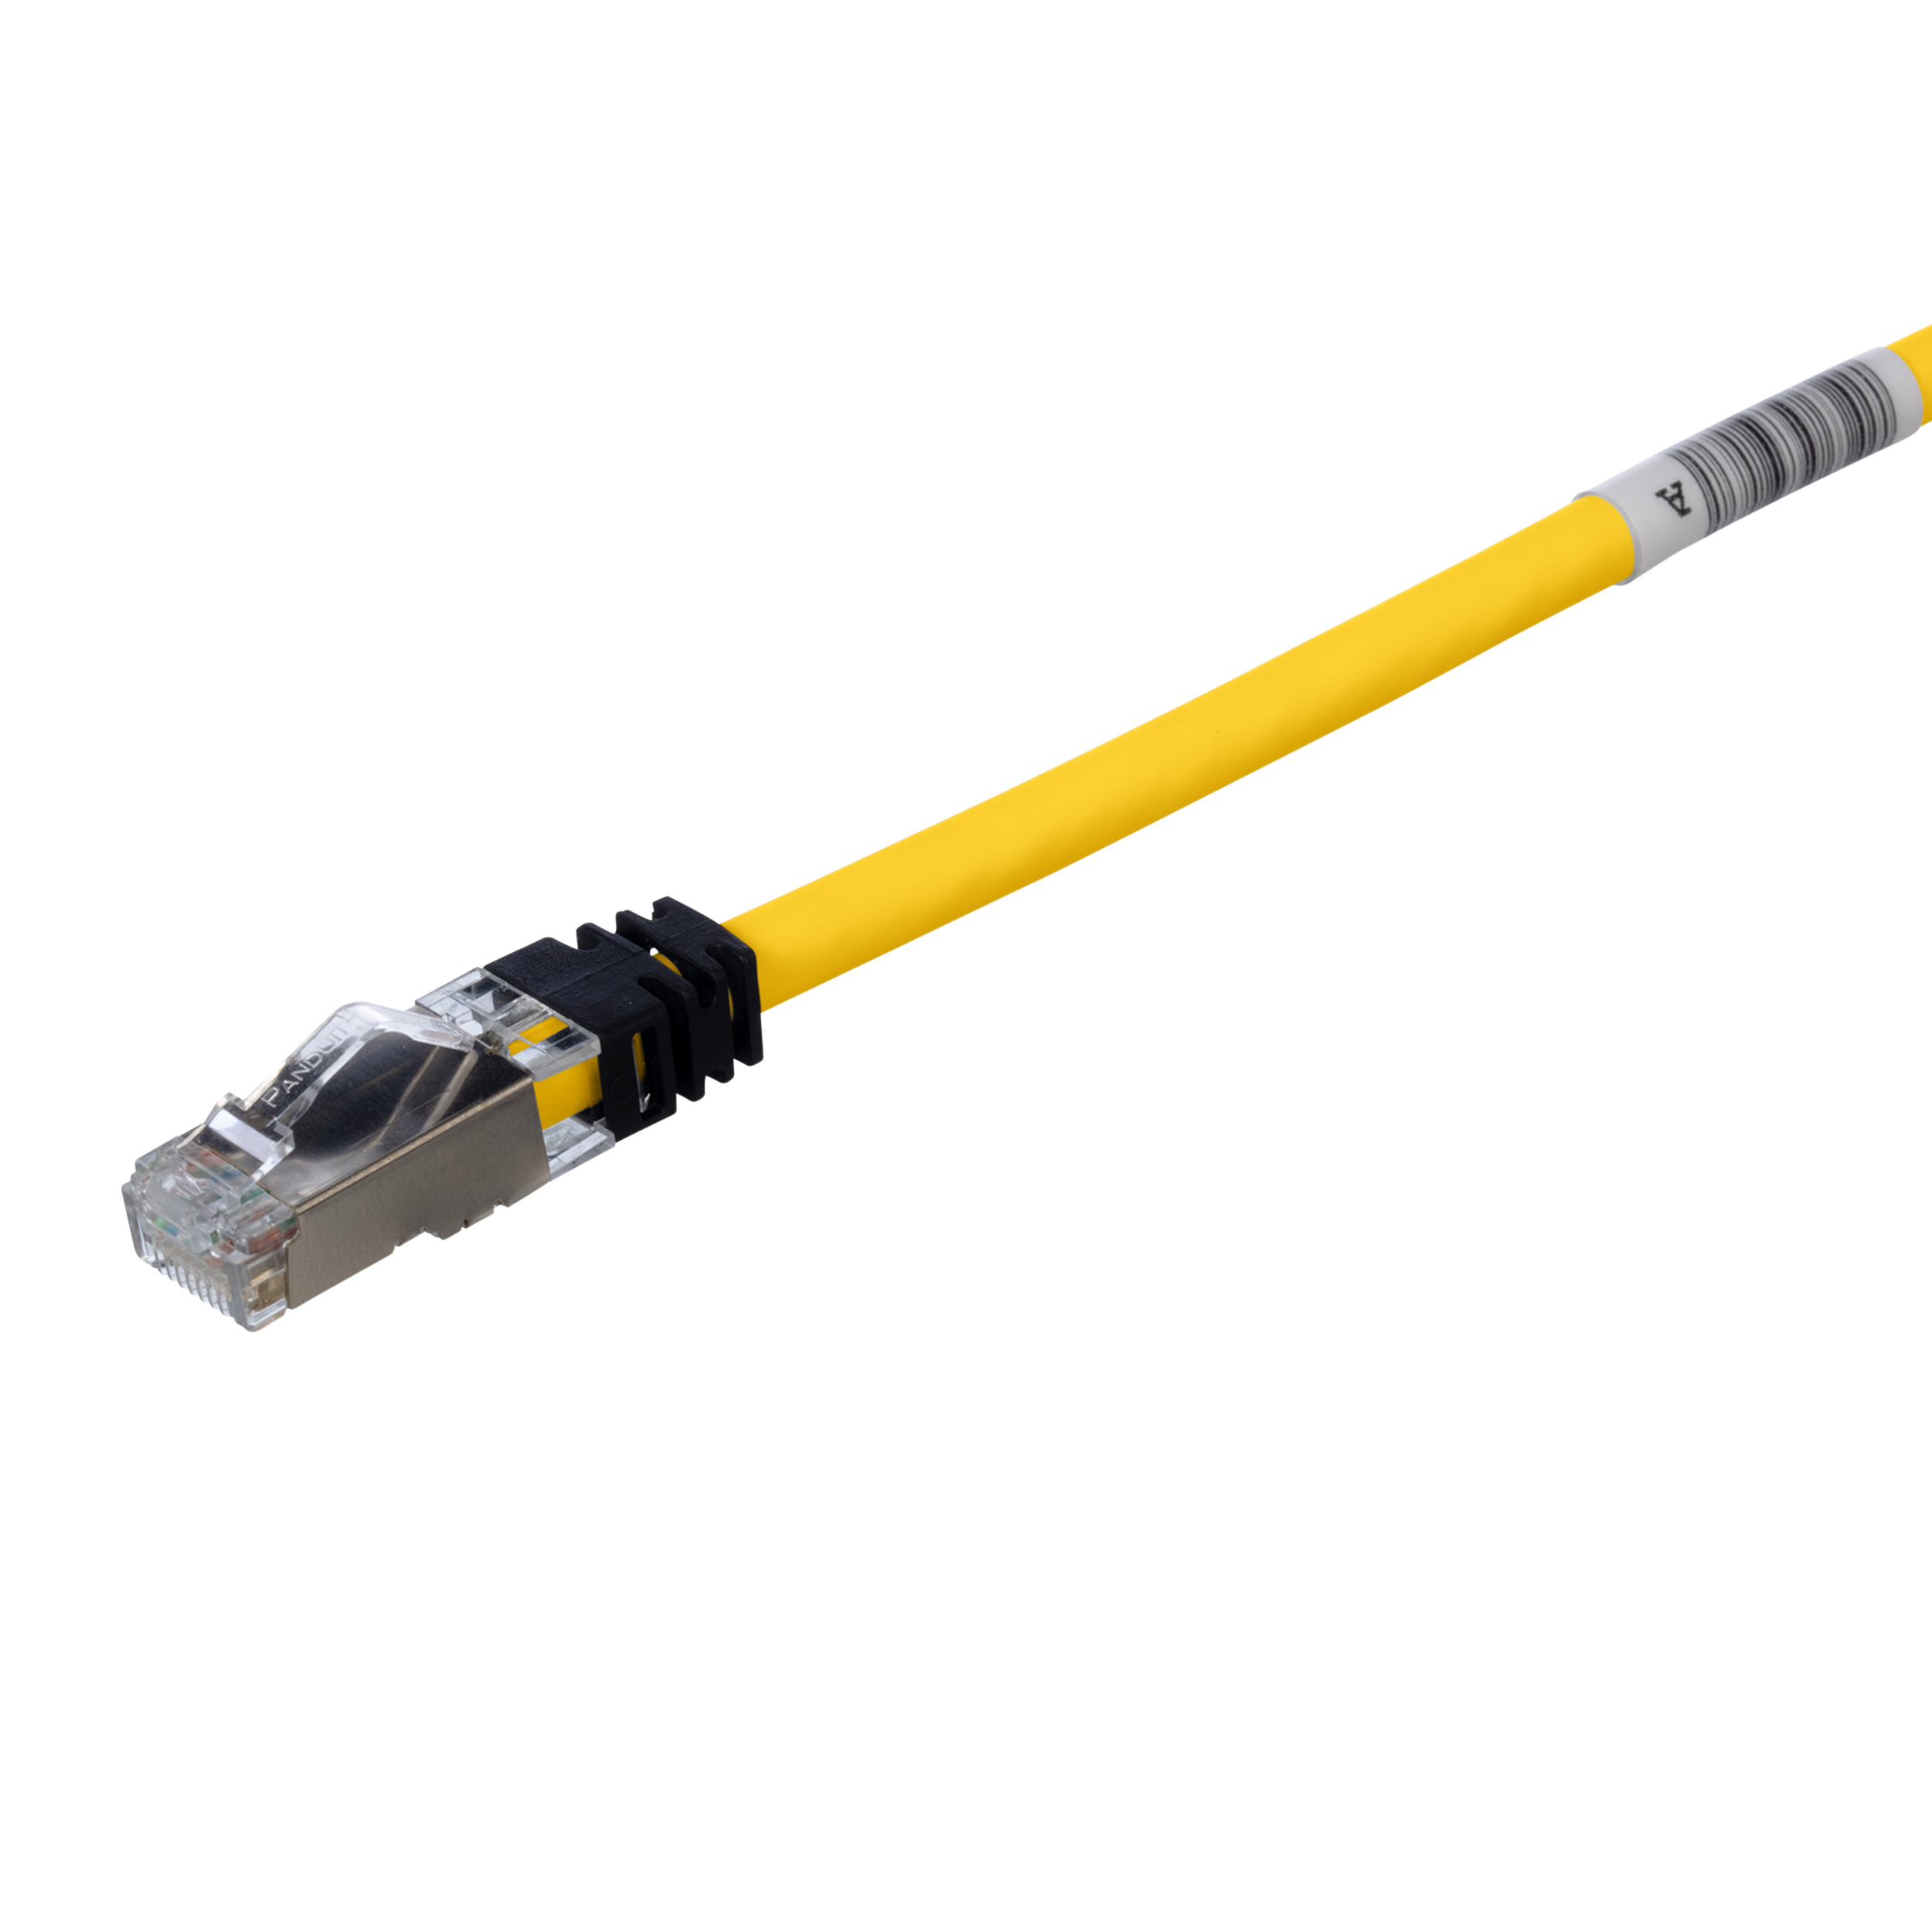 Cat 6A 26 AWG Shielded Patch Cord, 10 m, Yellow